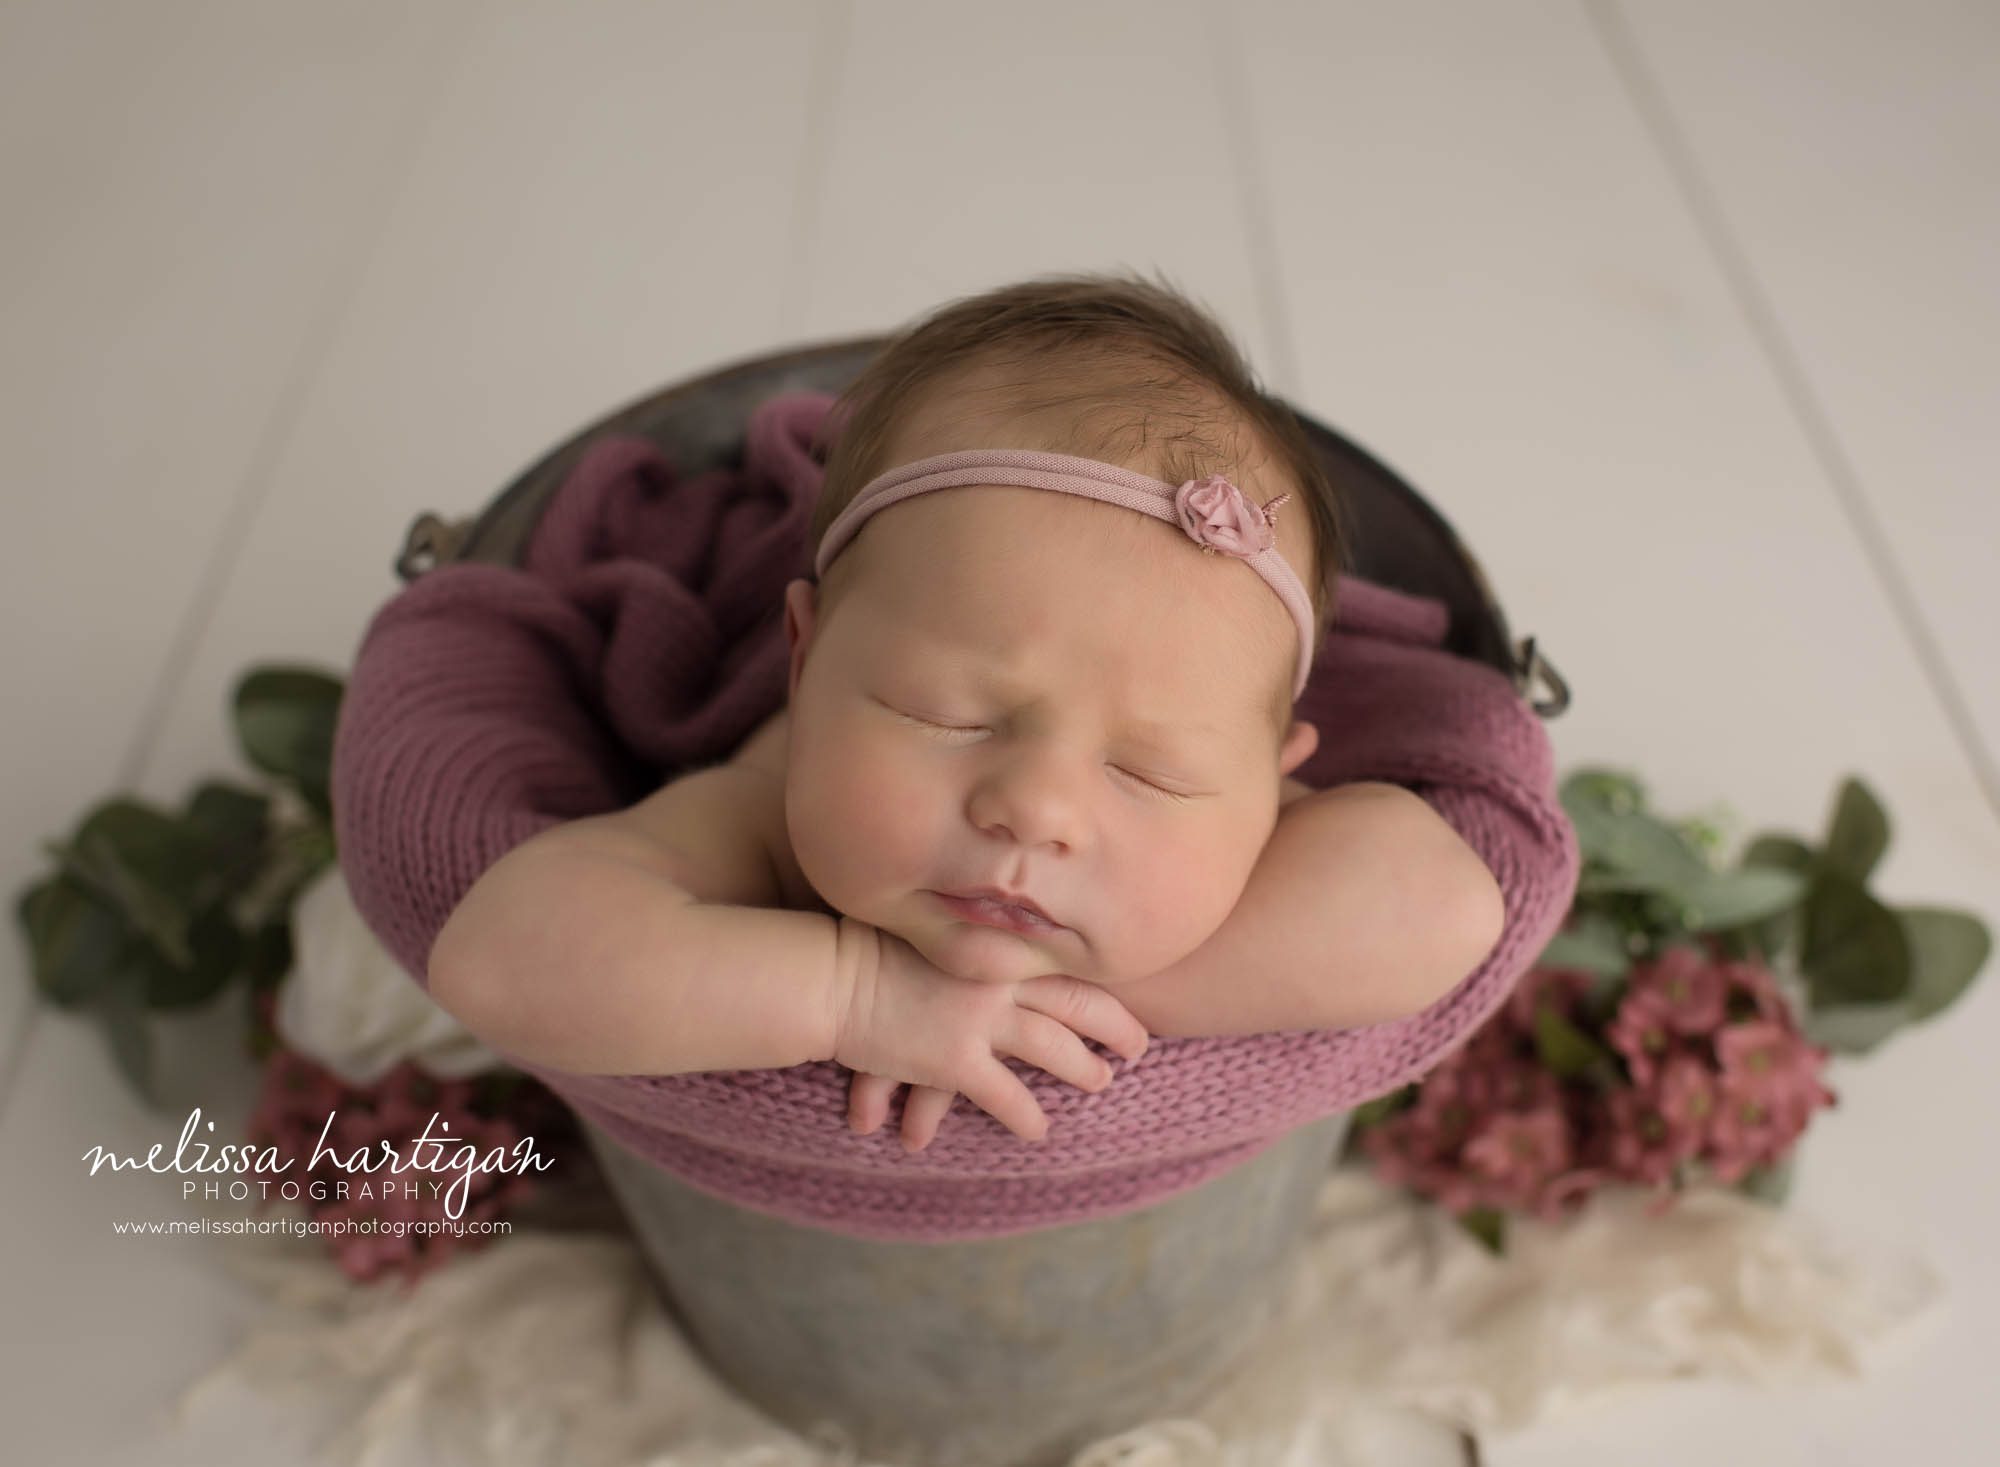 newborn baby girl posed in bucket with rose pink knit wrap and pink bow